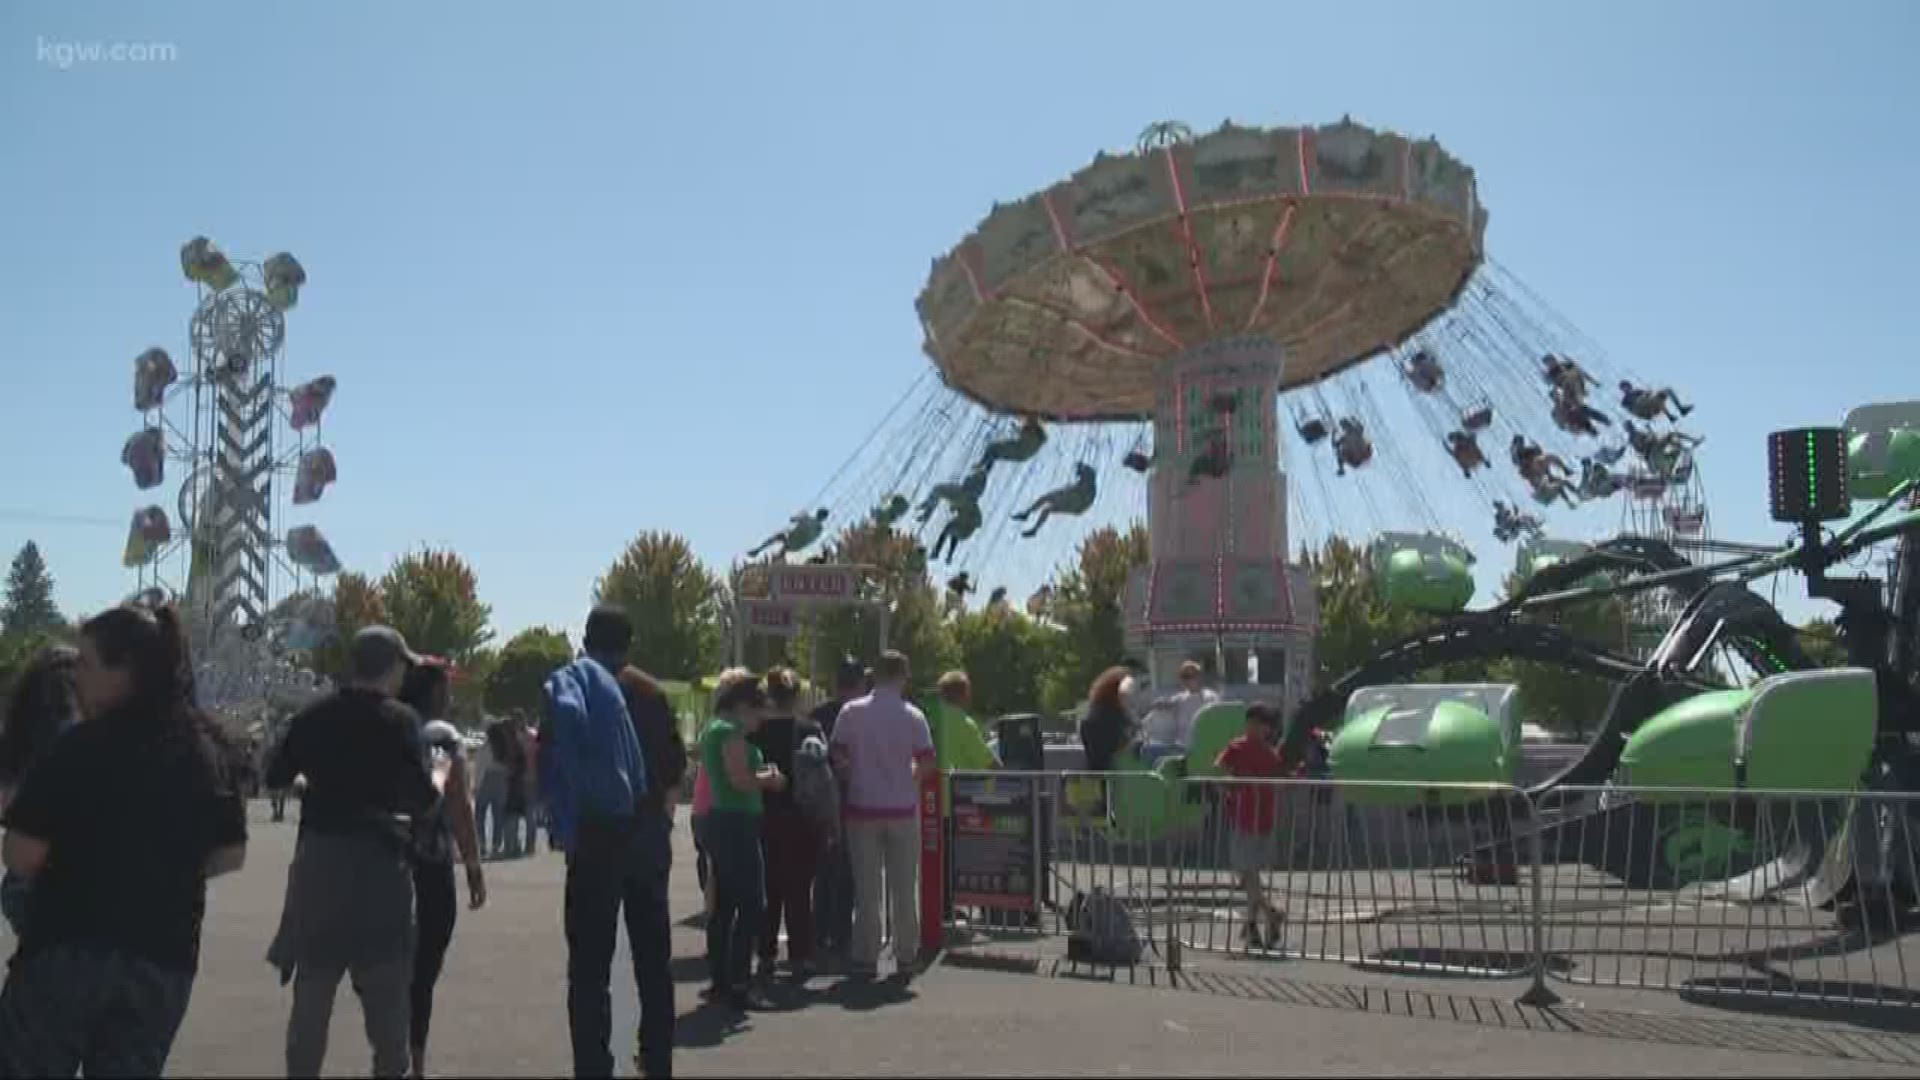 The Oregon State Fair is in full swing this week down in Salem. They have everything deep-fried you can imagine: Oreos, s'mores, Twinkies, cinnamon rolls. Even Krispy Kreme hamburgers!